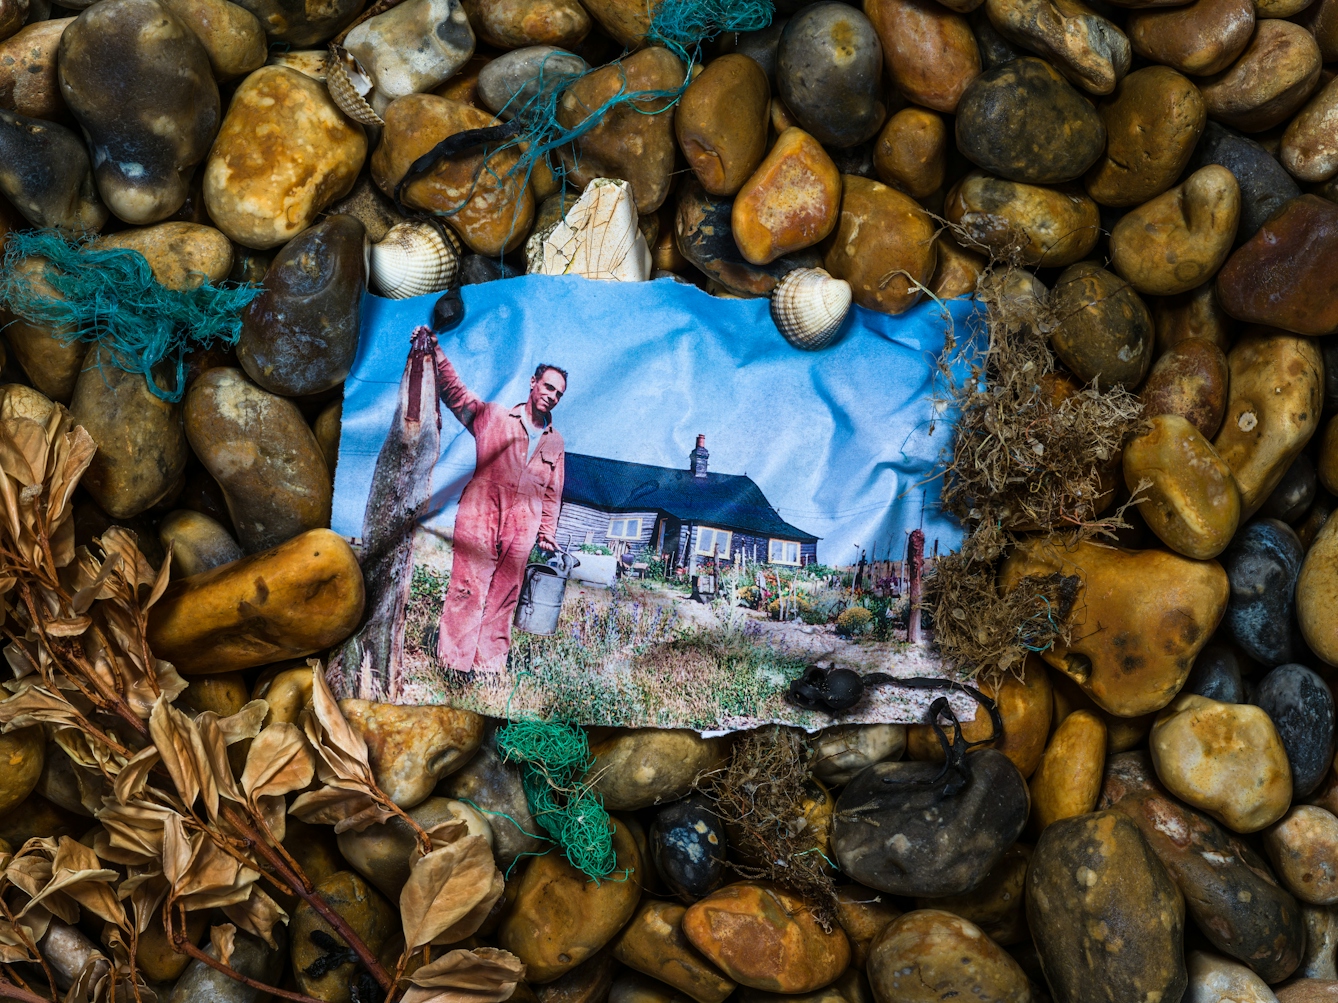 Photograph of a shingle beach made up of pebbles of all different sizes and shapes with a mix of brown and yellow hues. Nestled in the pebbles is a colour photographic print, soaked in sea water such that it has taken on the shape of the stones beneath. The print show Derek Jarman standing in the garden of his Dungeness cottage. With one hand he is holding on to a vertical piece of driftwood, the other holds a galvanised watering can. He is bathed in sunlight, smiling to camera. Surrounding the print on the stones are sea shells, sprigs of beachfront vegetation and the frayed blue and green nylon threads of fishing nets.